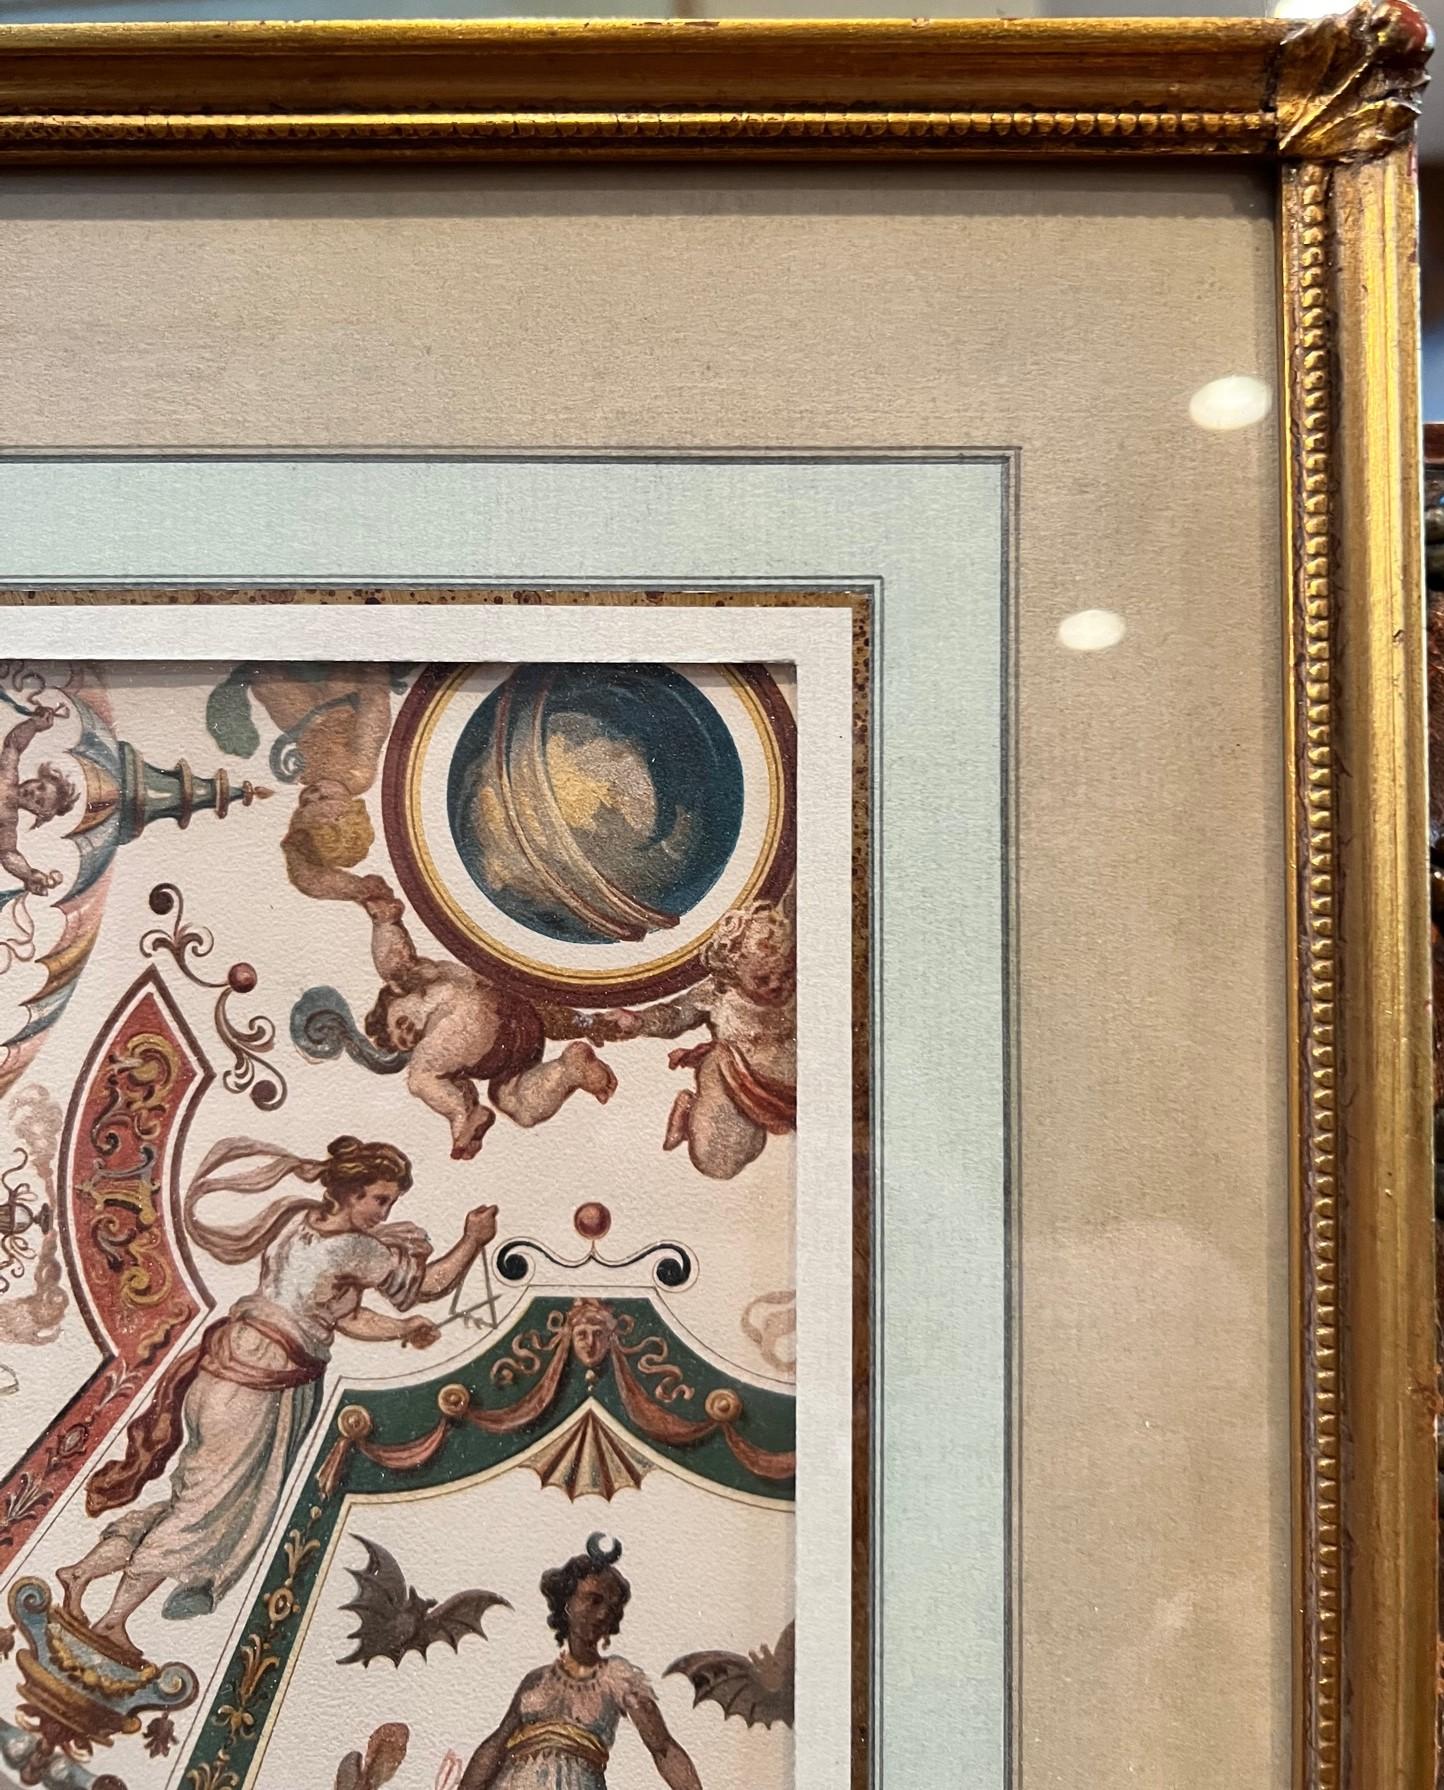 Antique German architecture print on heavy paper showing an illustration of a portion of a ceiling painting in the Uffizi Gallery, Florence, 16th century (Uffizien Deckenmalerei (XVI Jahrh), Florenz). This chromolithograph on a 1:10 scale is after